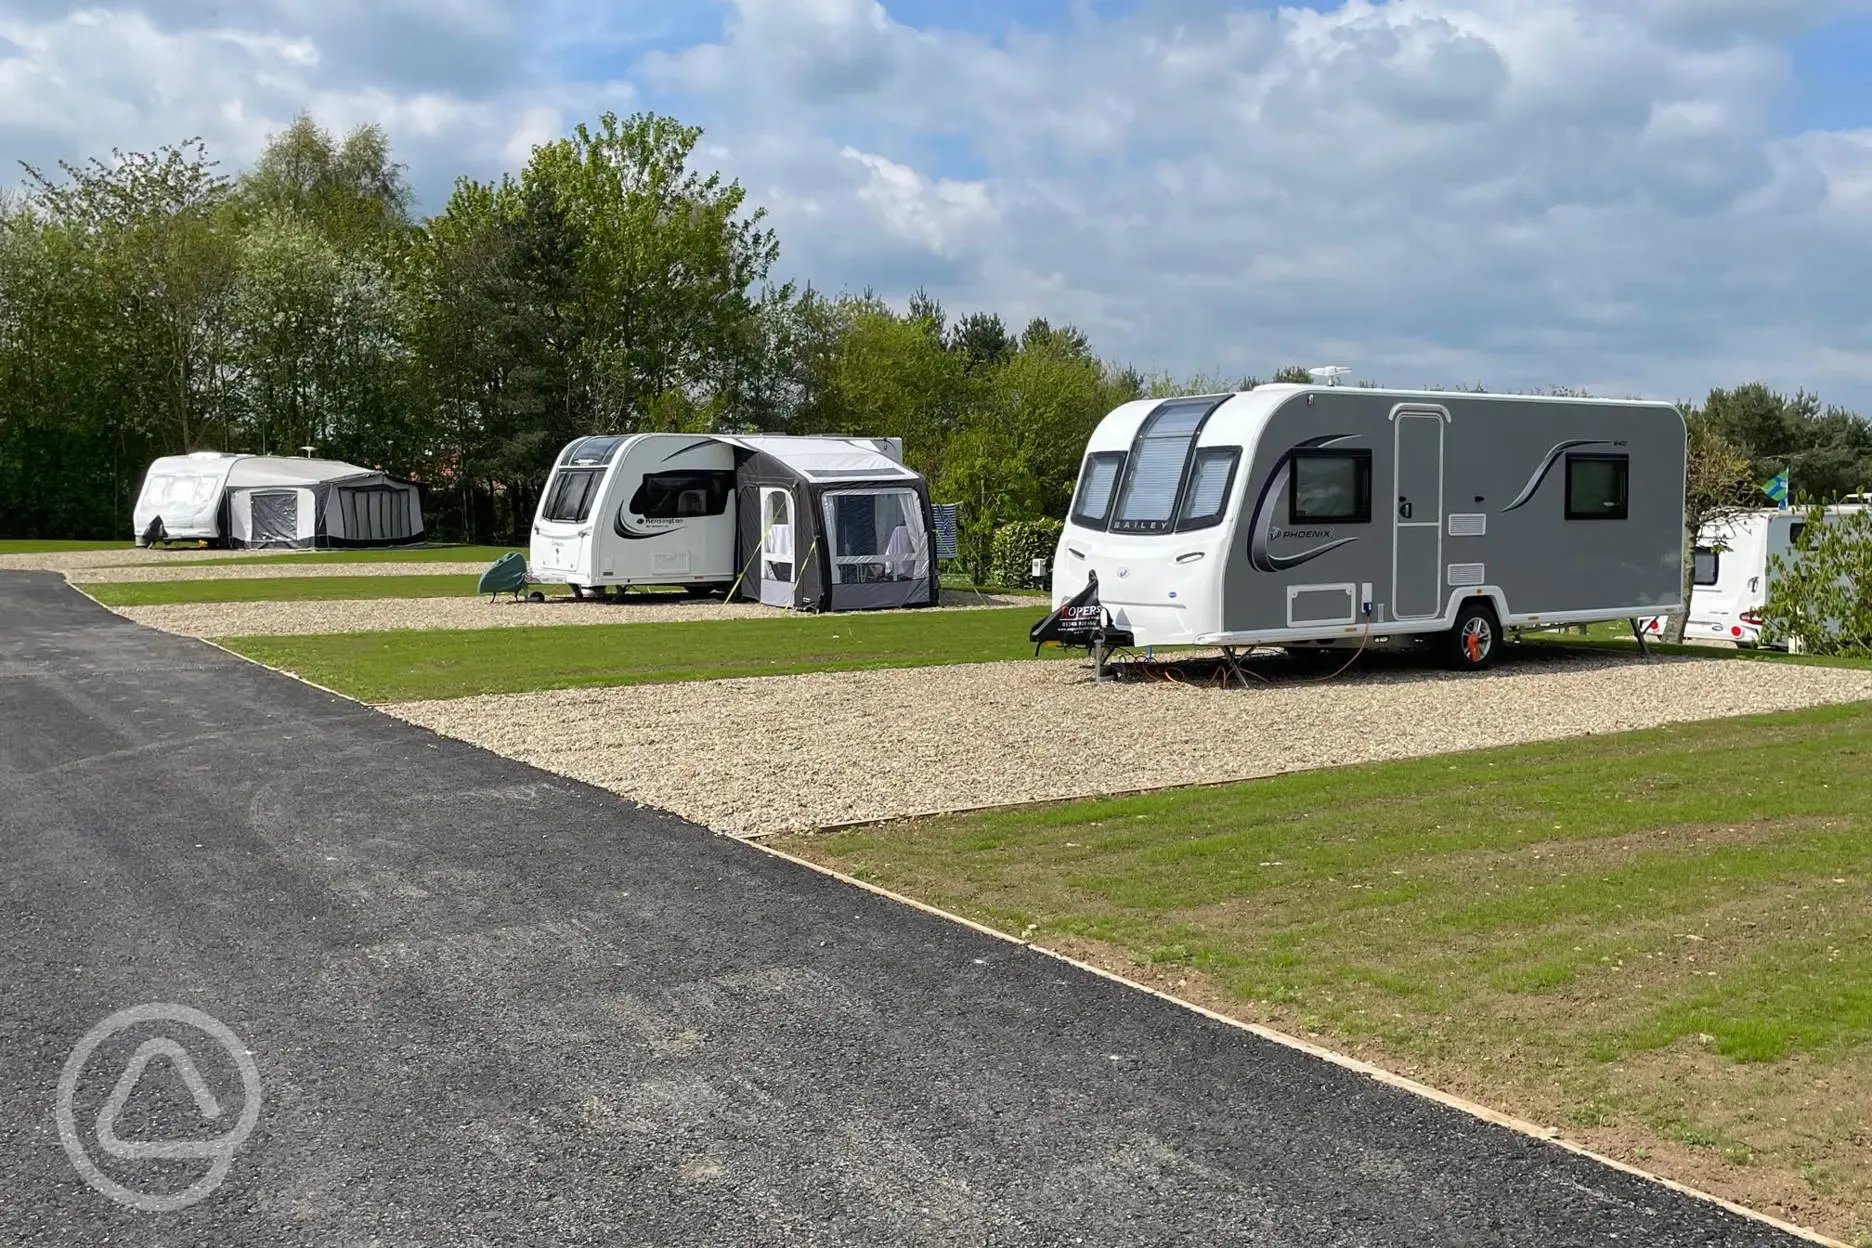 All weather pitches for touring caravans